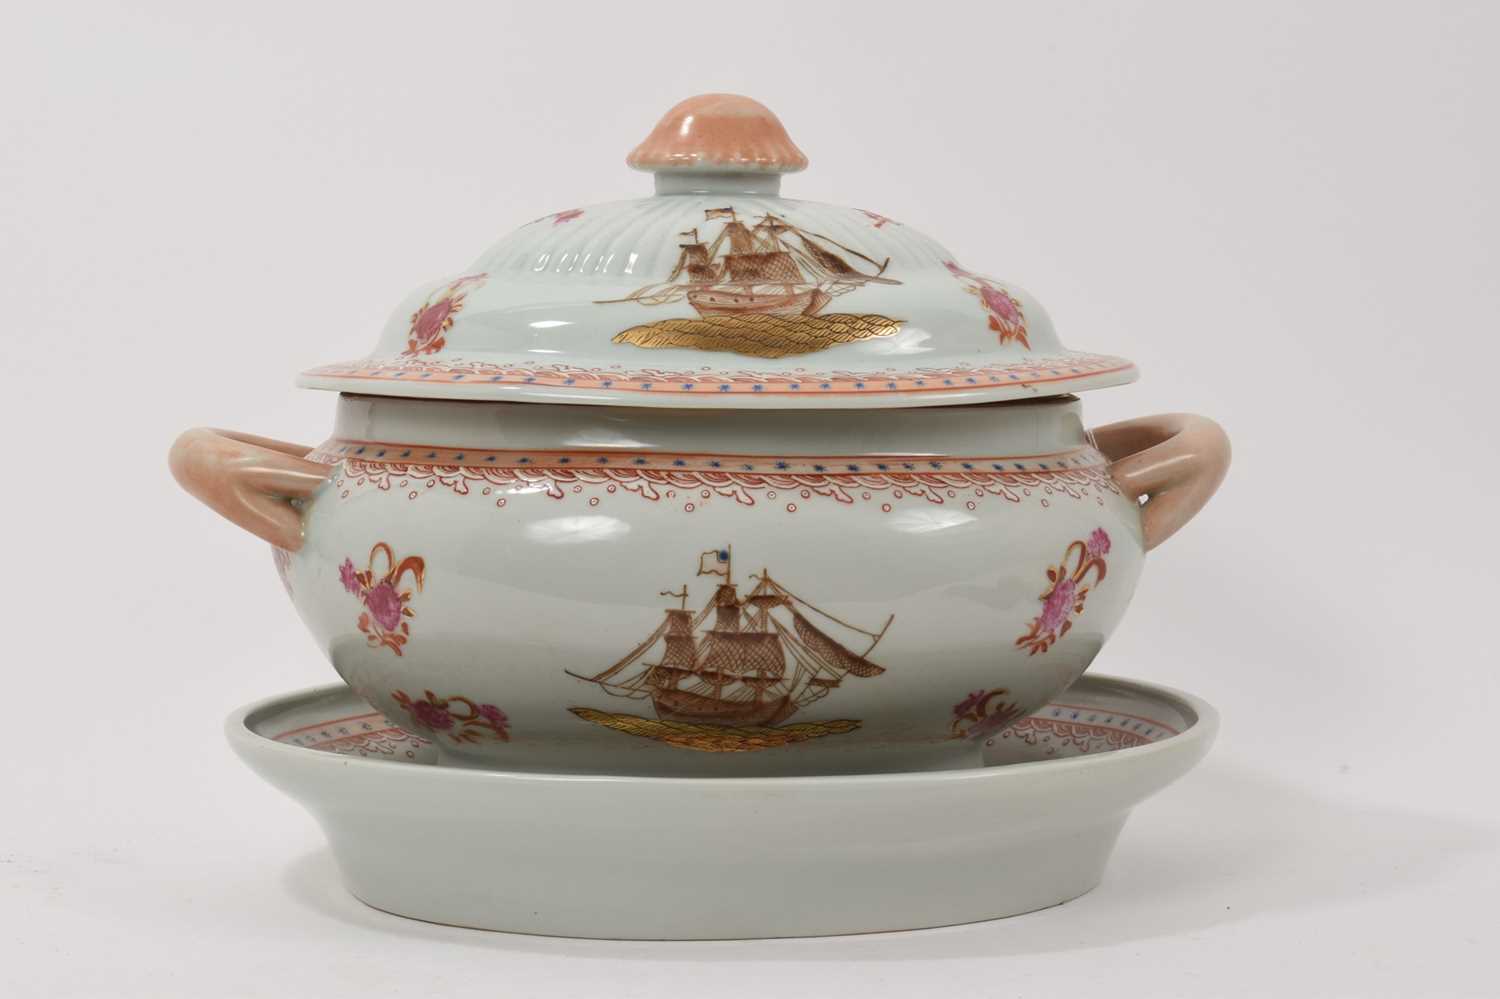 Lot 73 - Chinese export oval tureen, cover and stand, 20th century